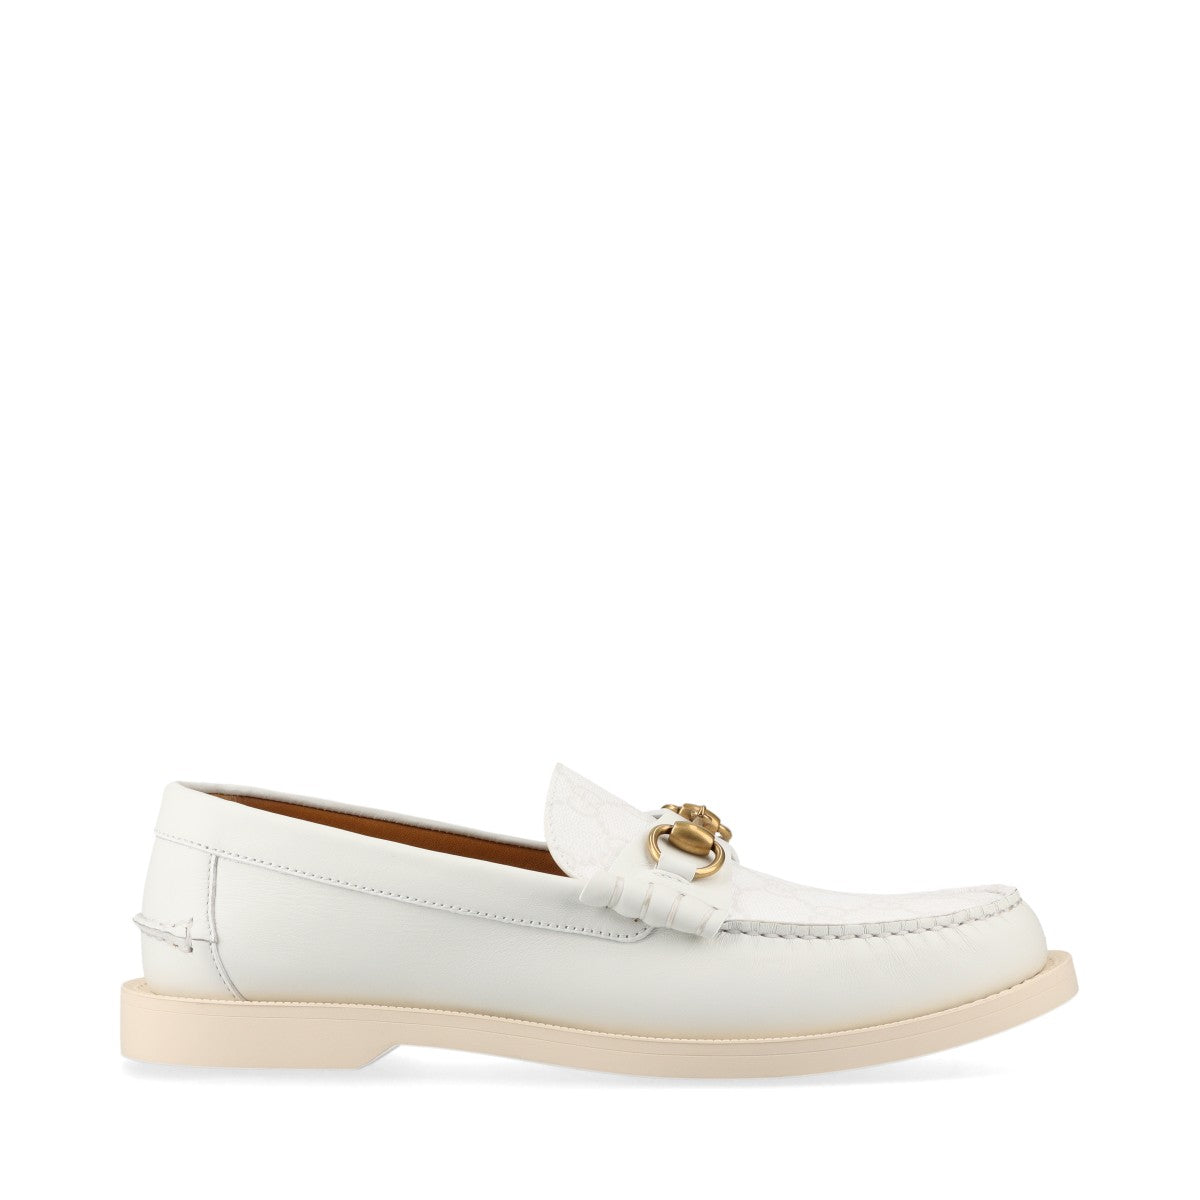 Gucci Horsebit PVC & leather Loafer US6 1/2 Men's White 695049 GG Supreme Box There is a bag